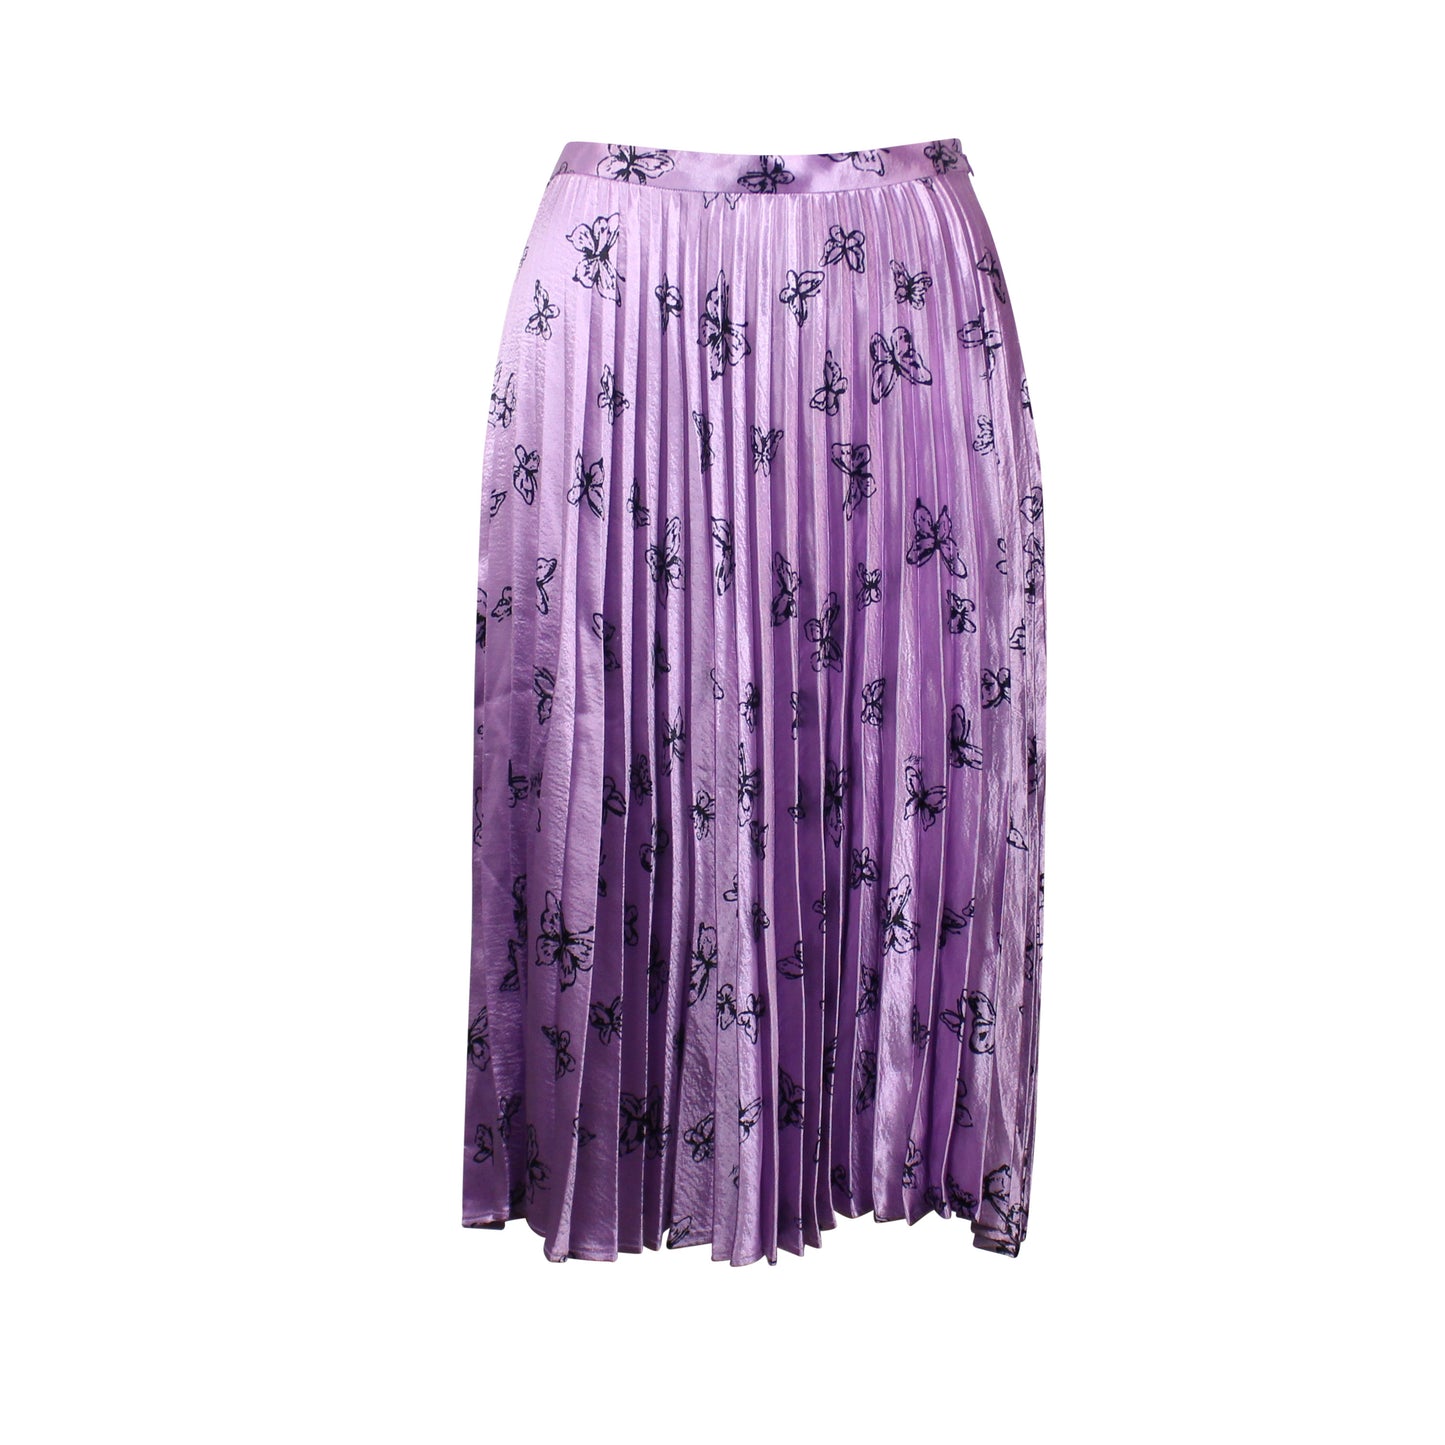 Hvn Tracy Pleated Skirt - Pink